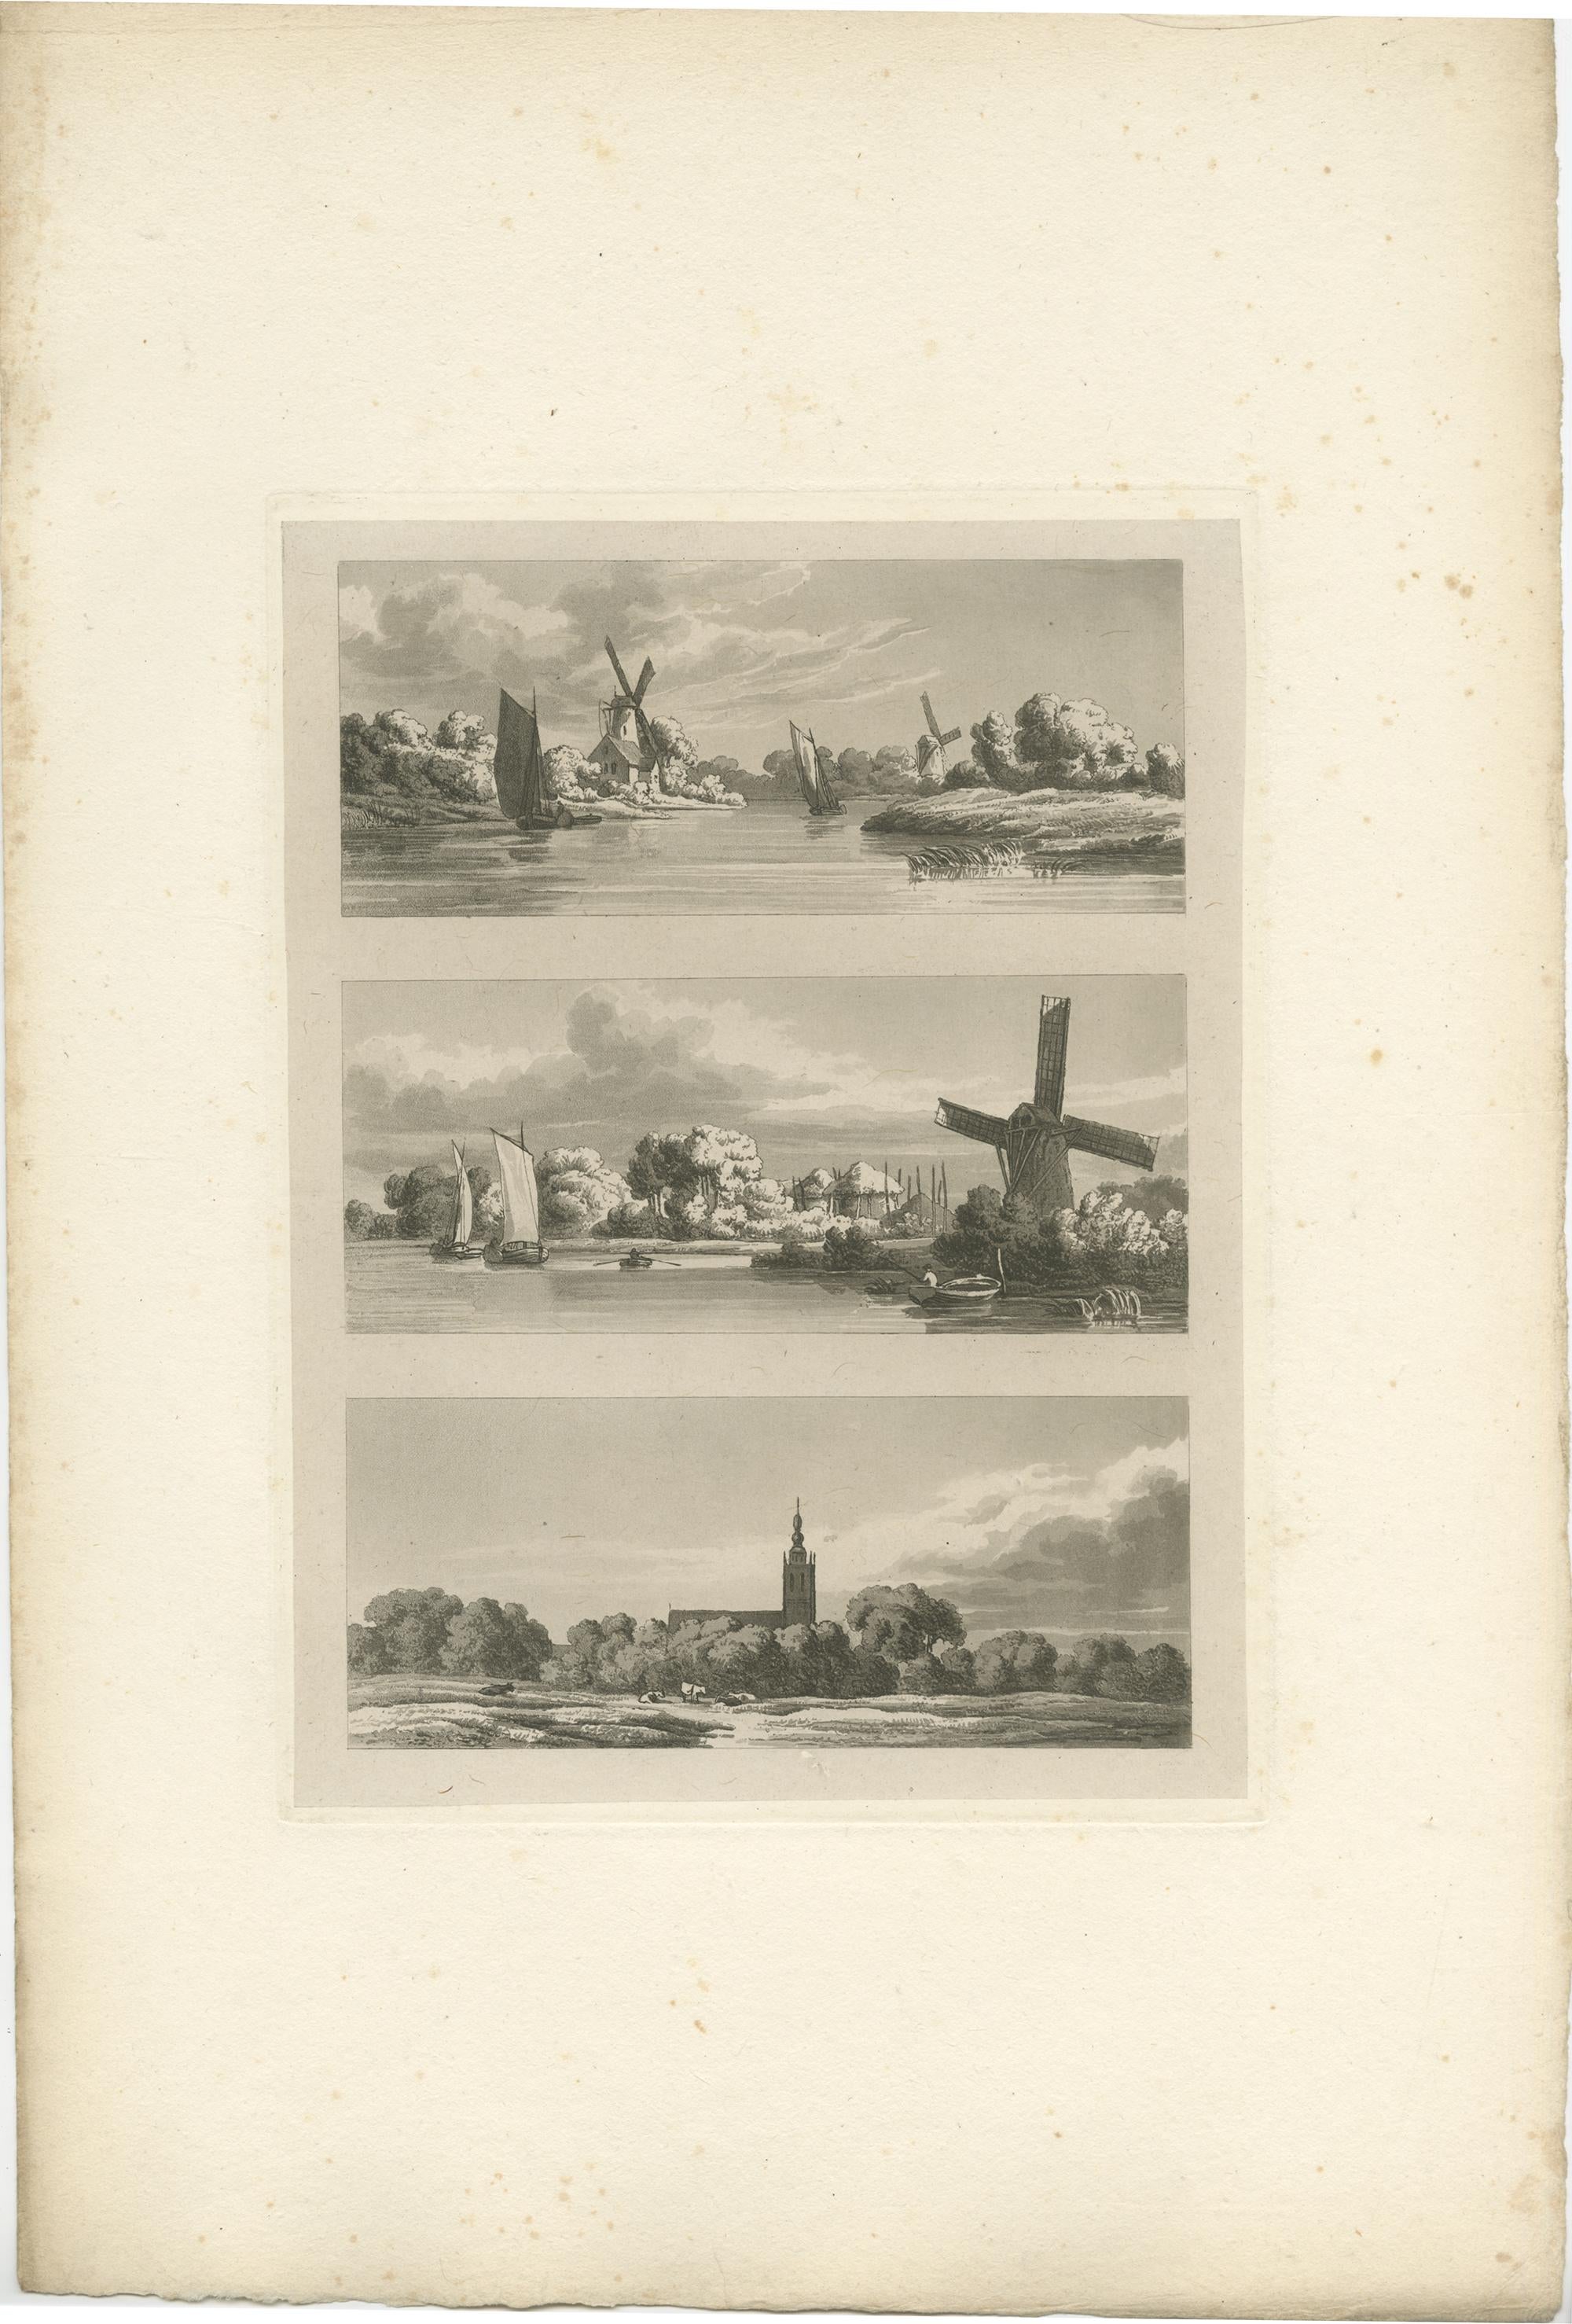 Set of two antique prints with views of Flanders and Holland. Published by or after Robert Hills, circa 1820.